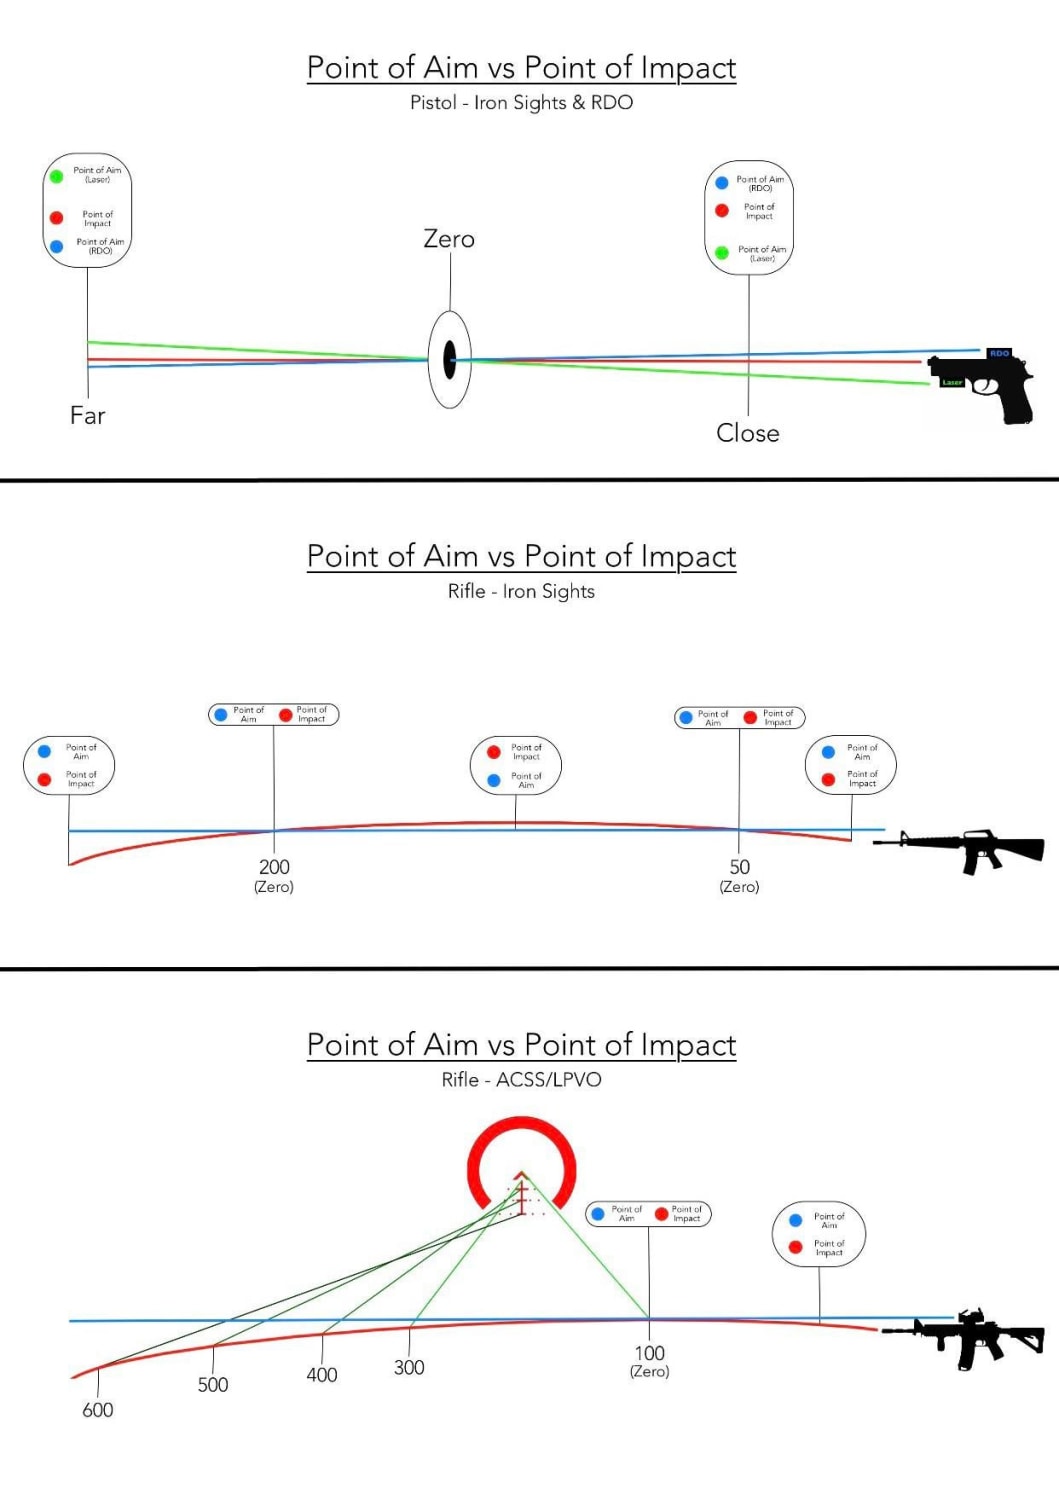 This PoA vs PoI guide for diffrent sights/weapons